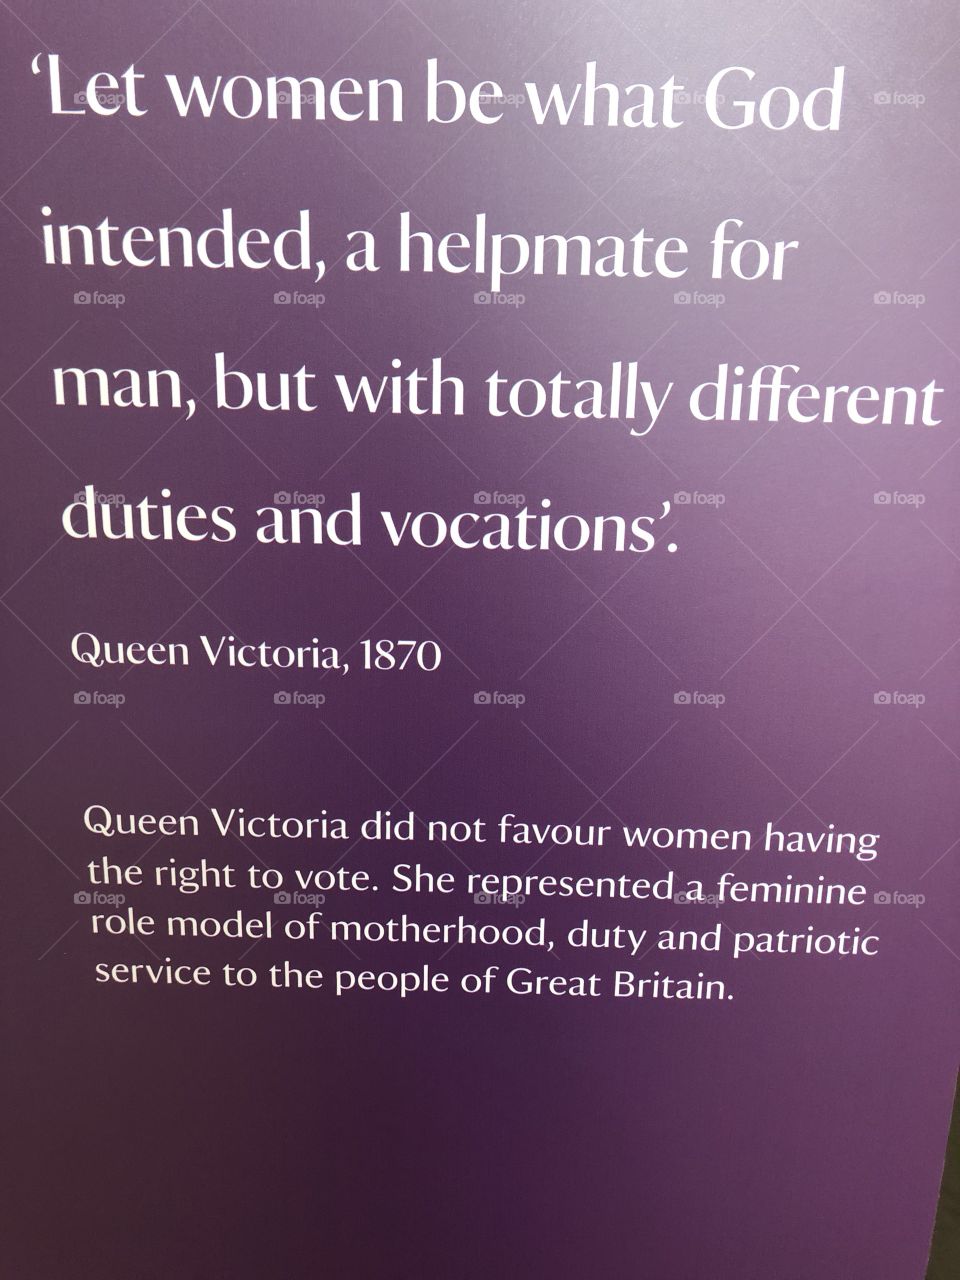 Queen Victoria said this in 1870 and was not a supporter of ‘Votes for Women.’